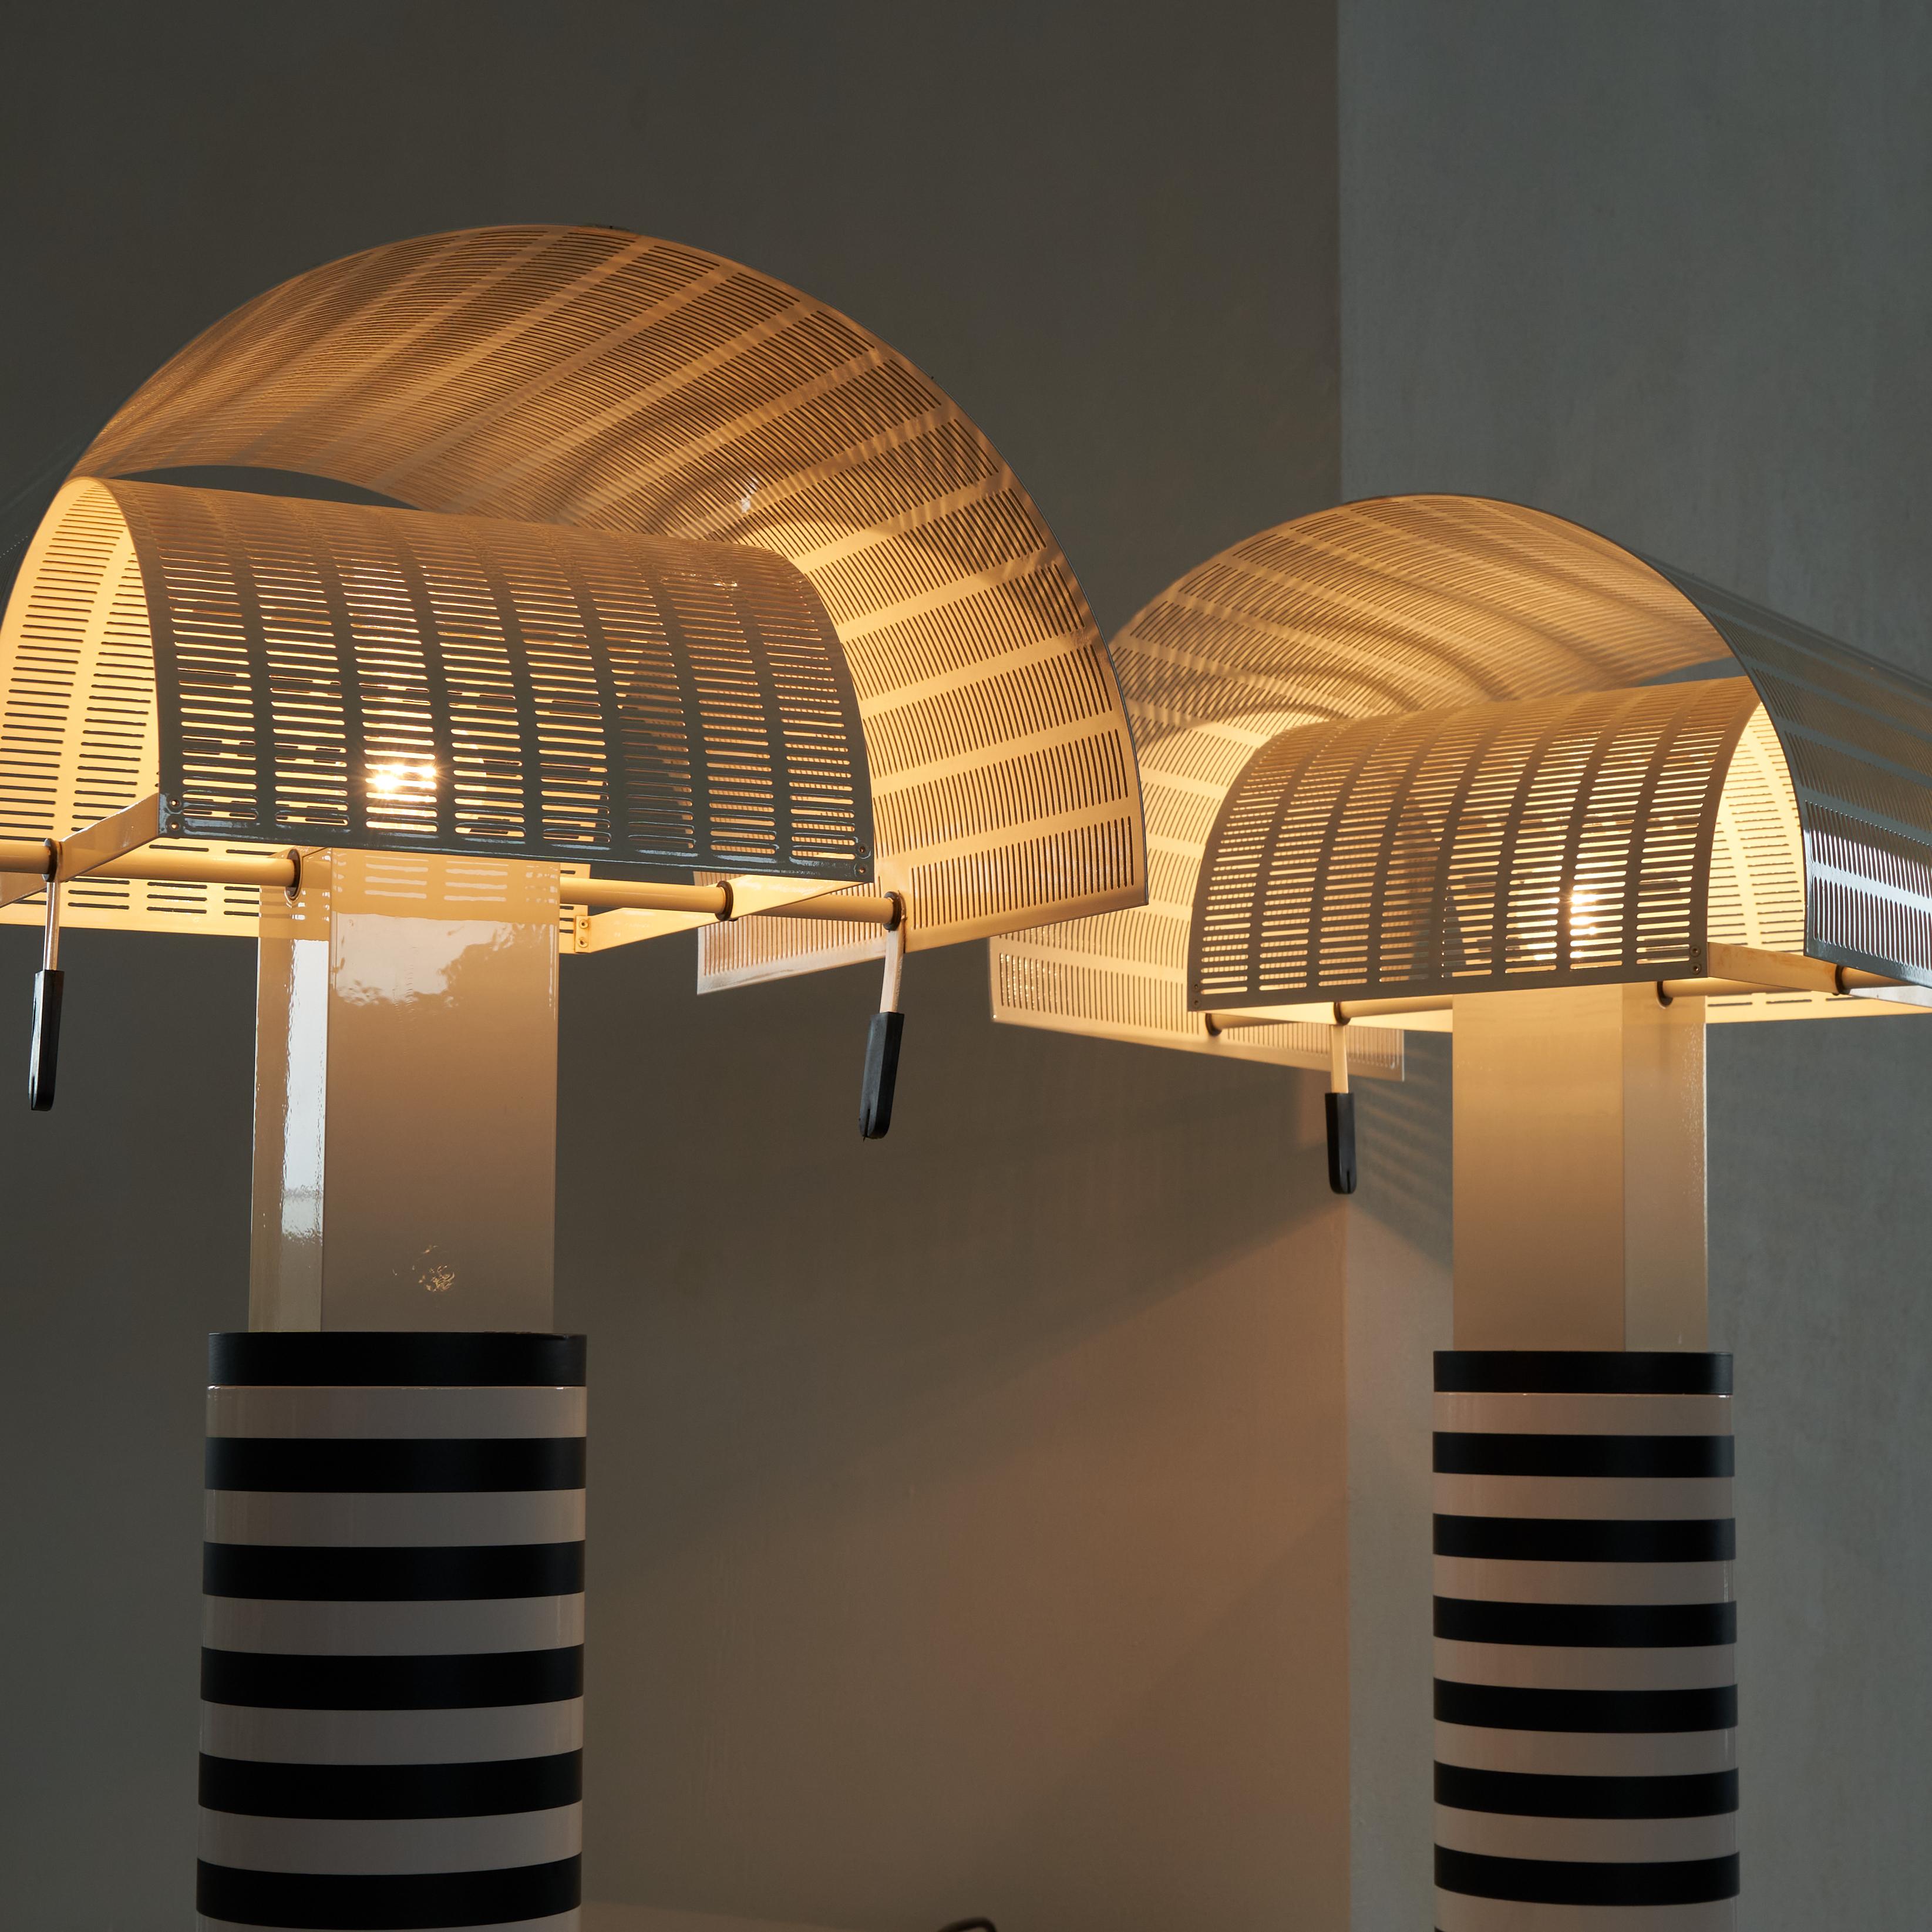 Exceptional pair of iconic vintage 'Shogun' Table Lamps by architect and designer Mario Botta (1943) for Artemide 1986.

Straight from the first owners, these table lamps have always been together. Bought by the original owners in 1987, these